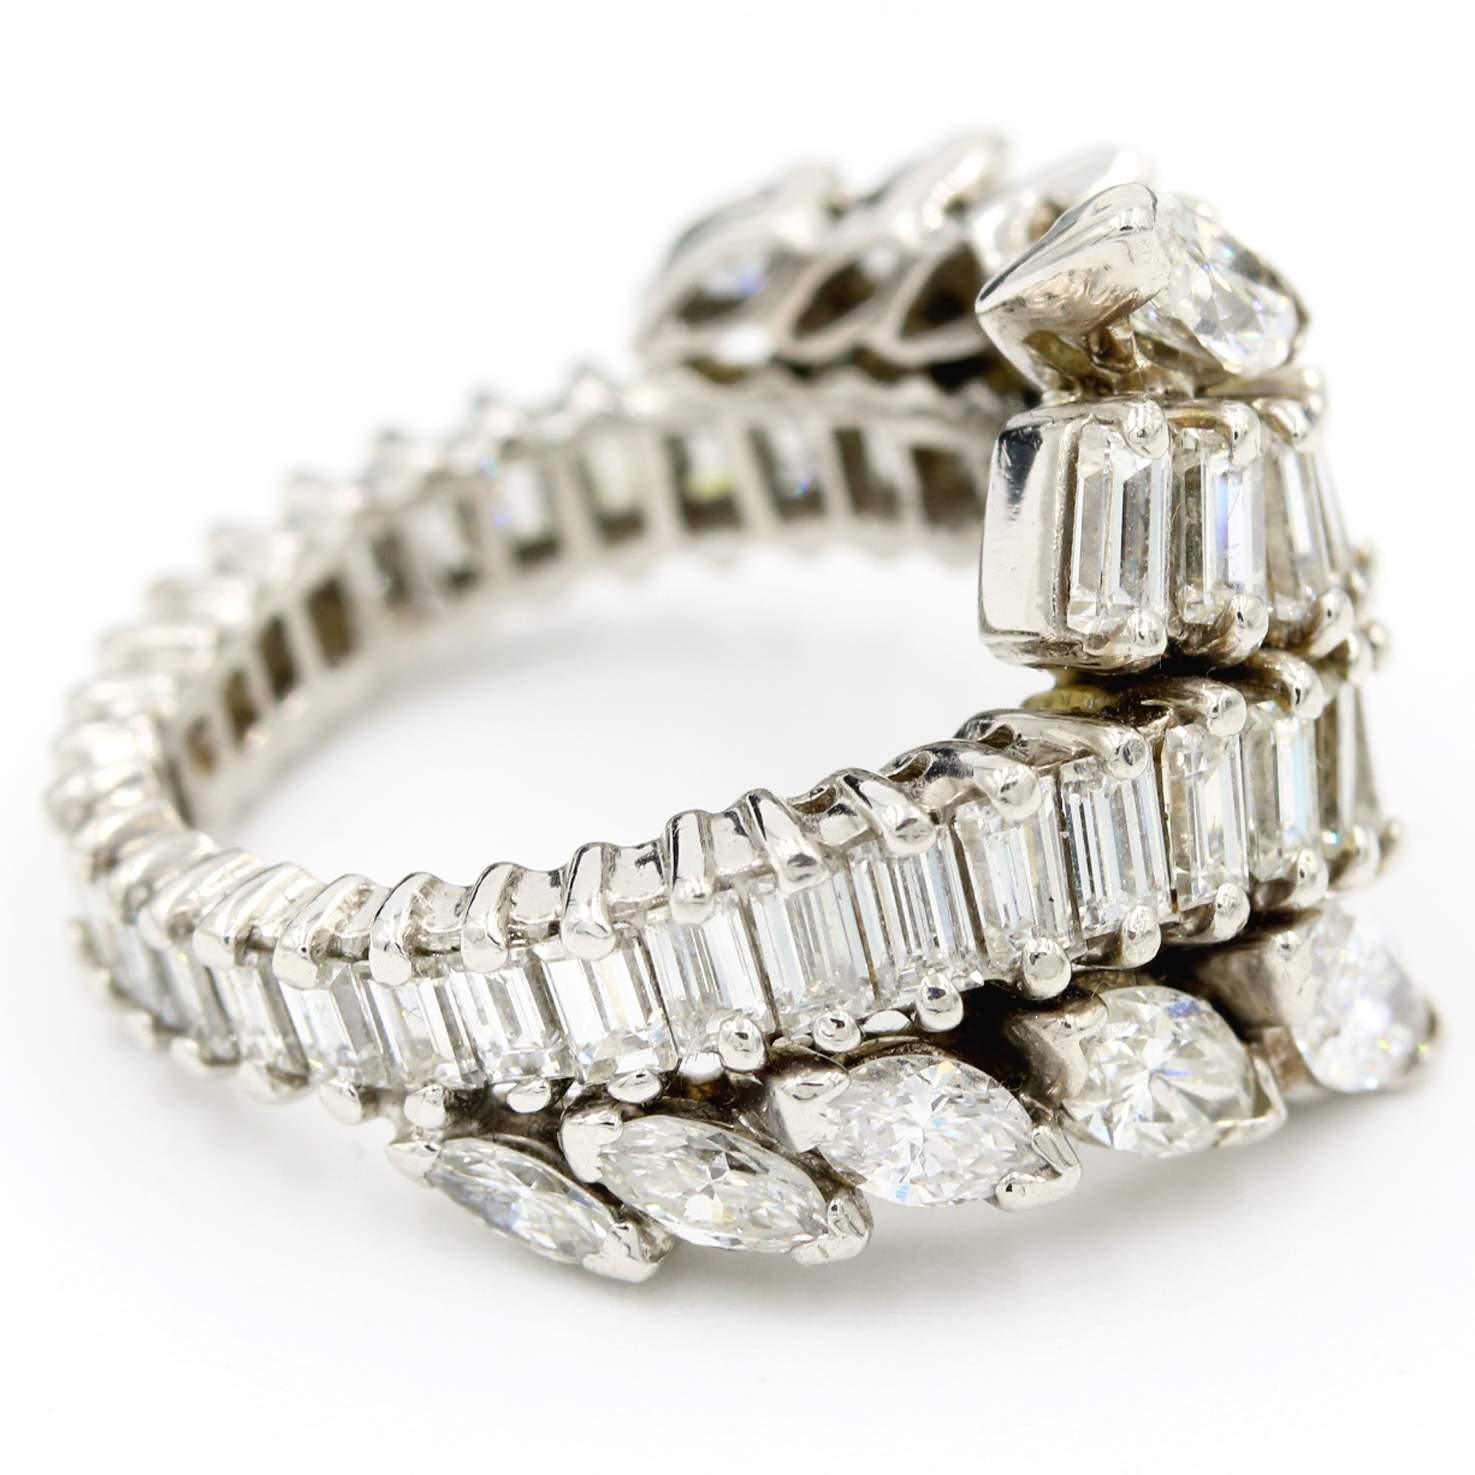 This platinum ring has 4.00 carat total weight of diamonds with a row of baguette diamonds that bypass each other on the front of the ring and 10 marquise diamonds. The diamonds are H in color and SI in clarity. This ring is a size 4.75.